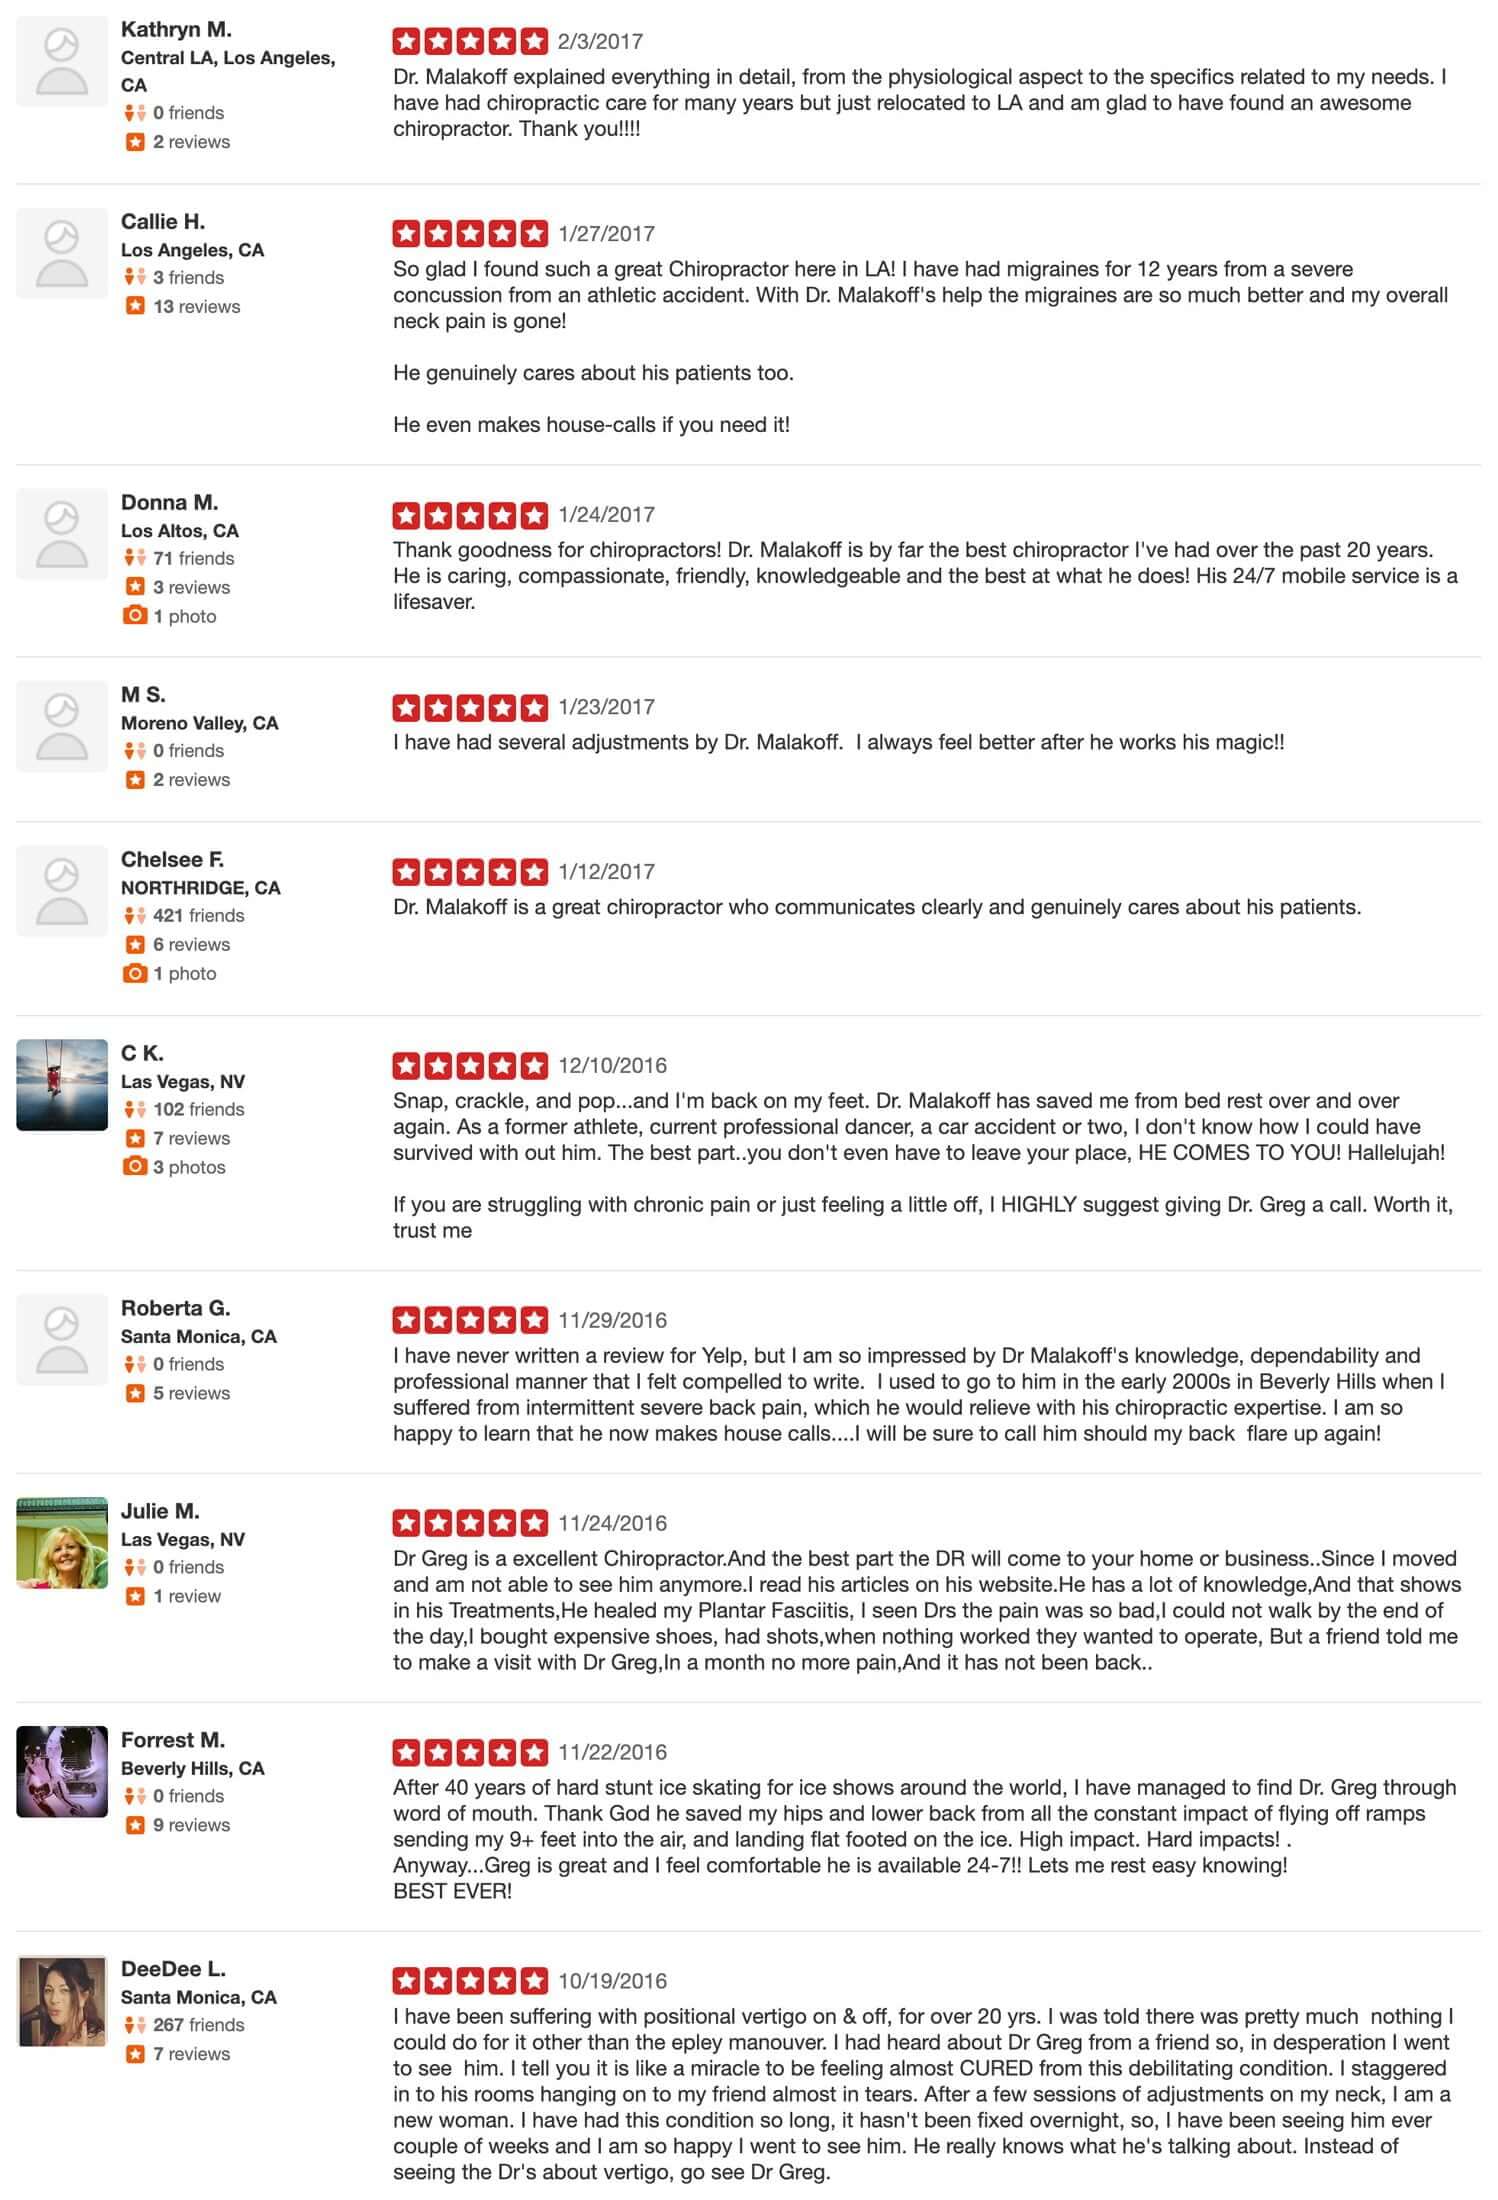 Dr Greg Malakoff Chiropractor Los Angeles Yelp Reviews Page 7